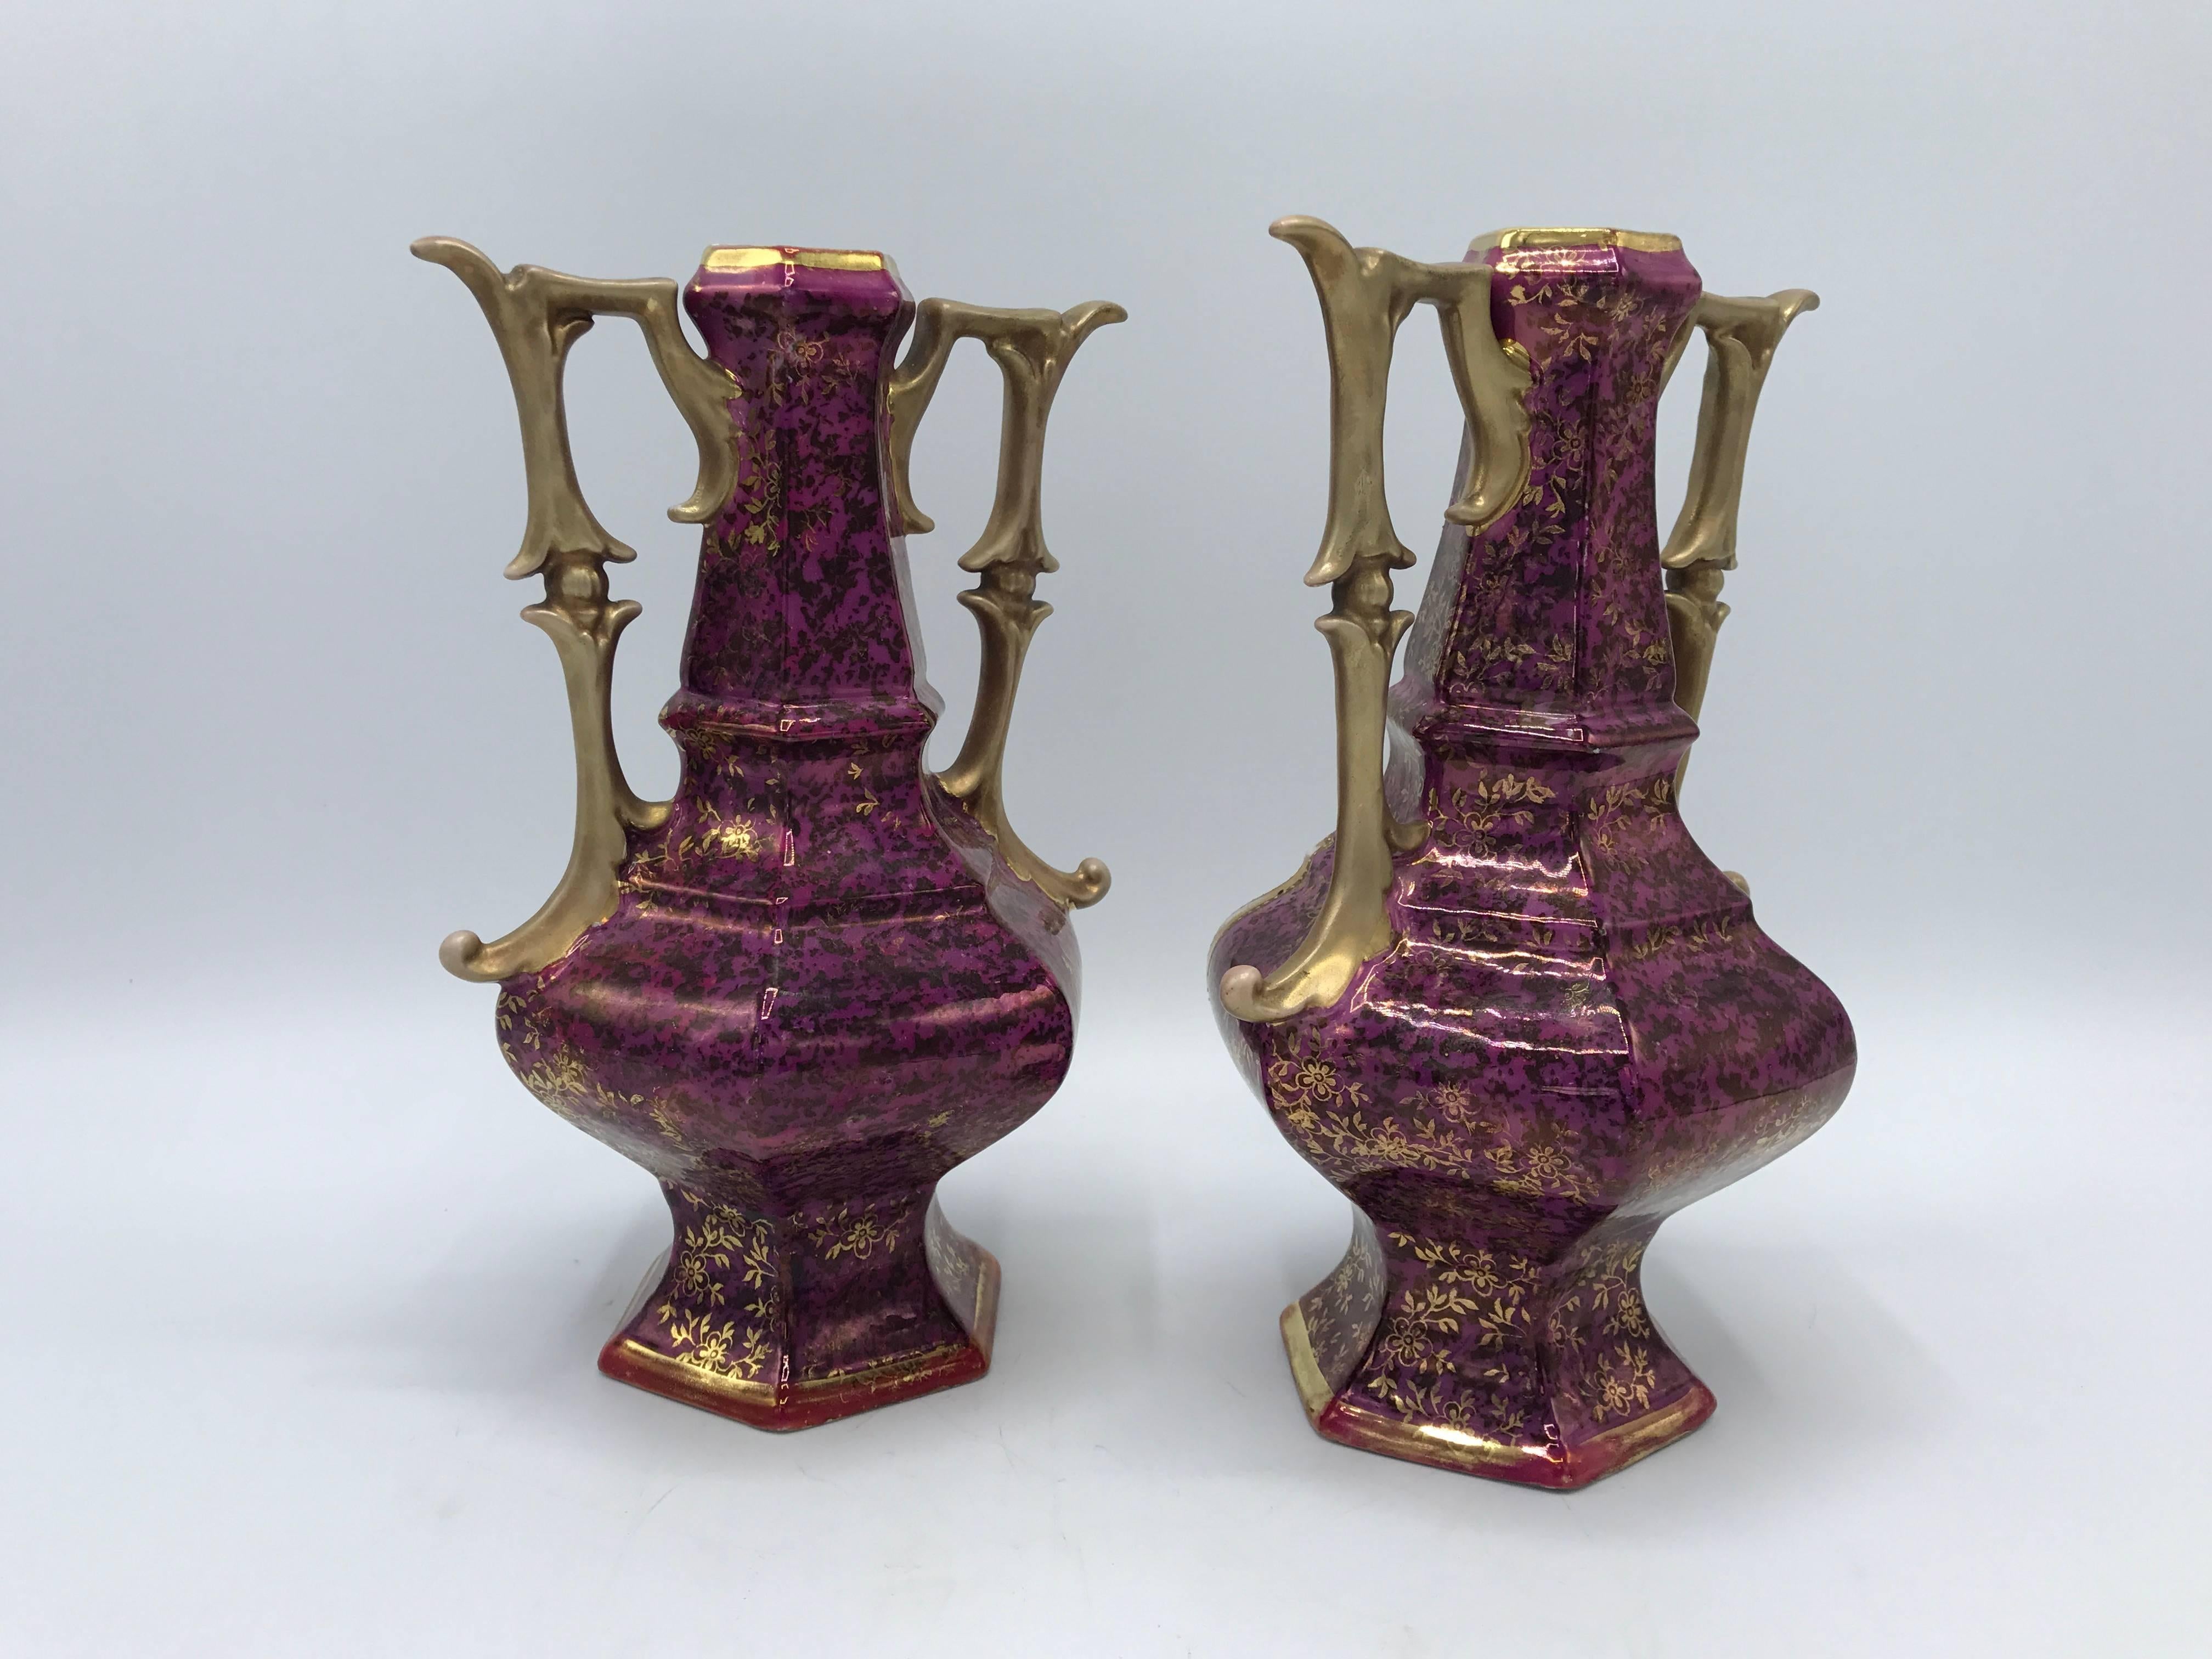 19th Century French Hand-Painted Pink and Gold Vases with Handles, Pair 2